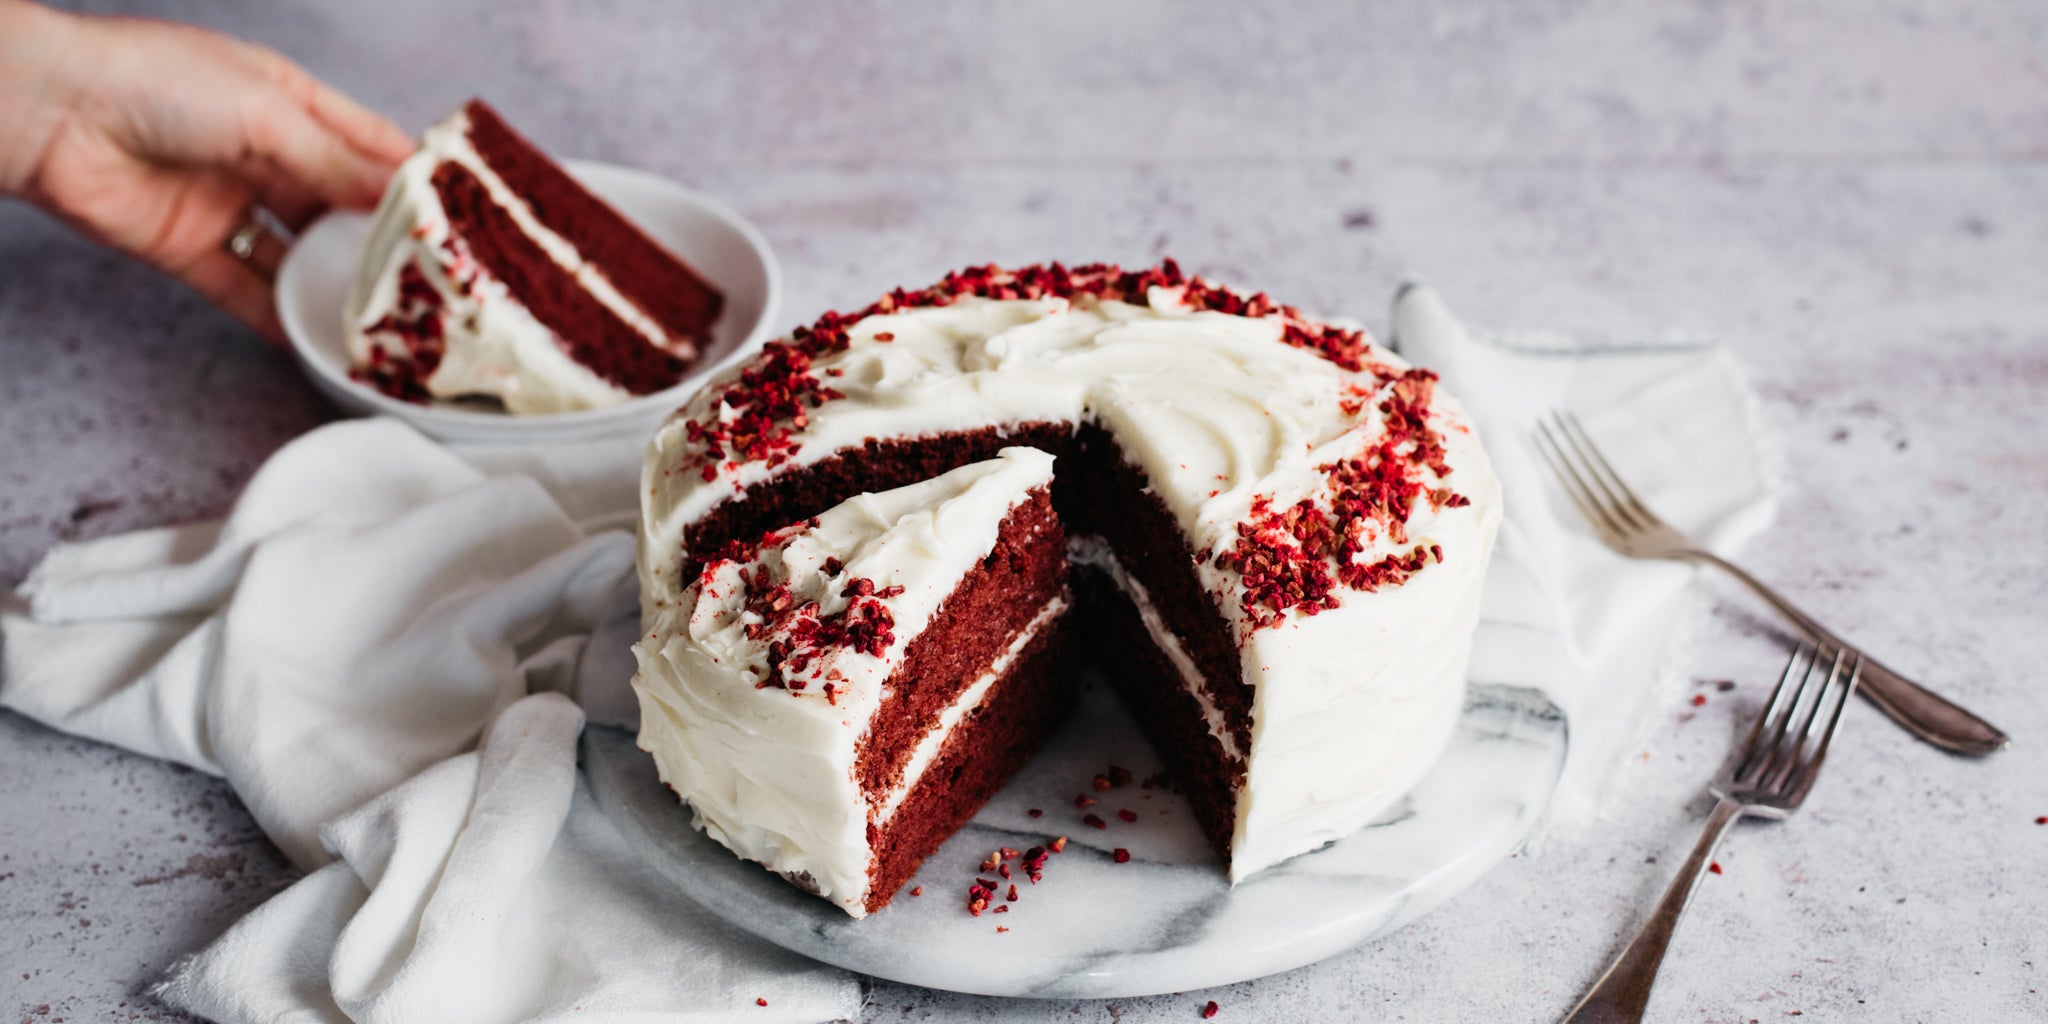 Red Velvet Cake with slices cut out of it showing the rich, red insides. Hand holding a plate with a slice of Red Velvet Cake